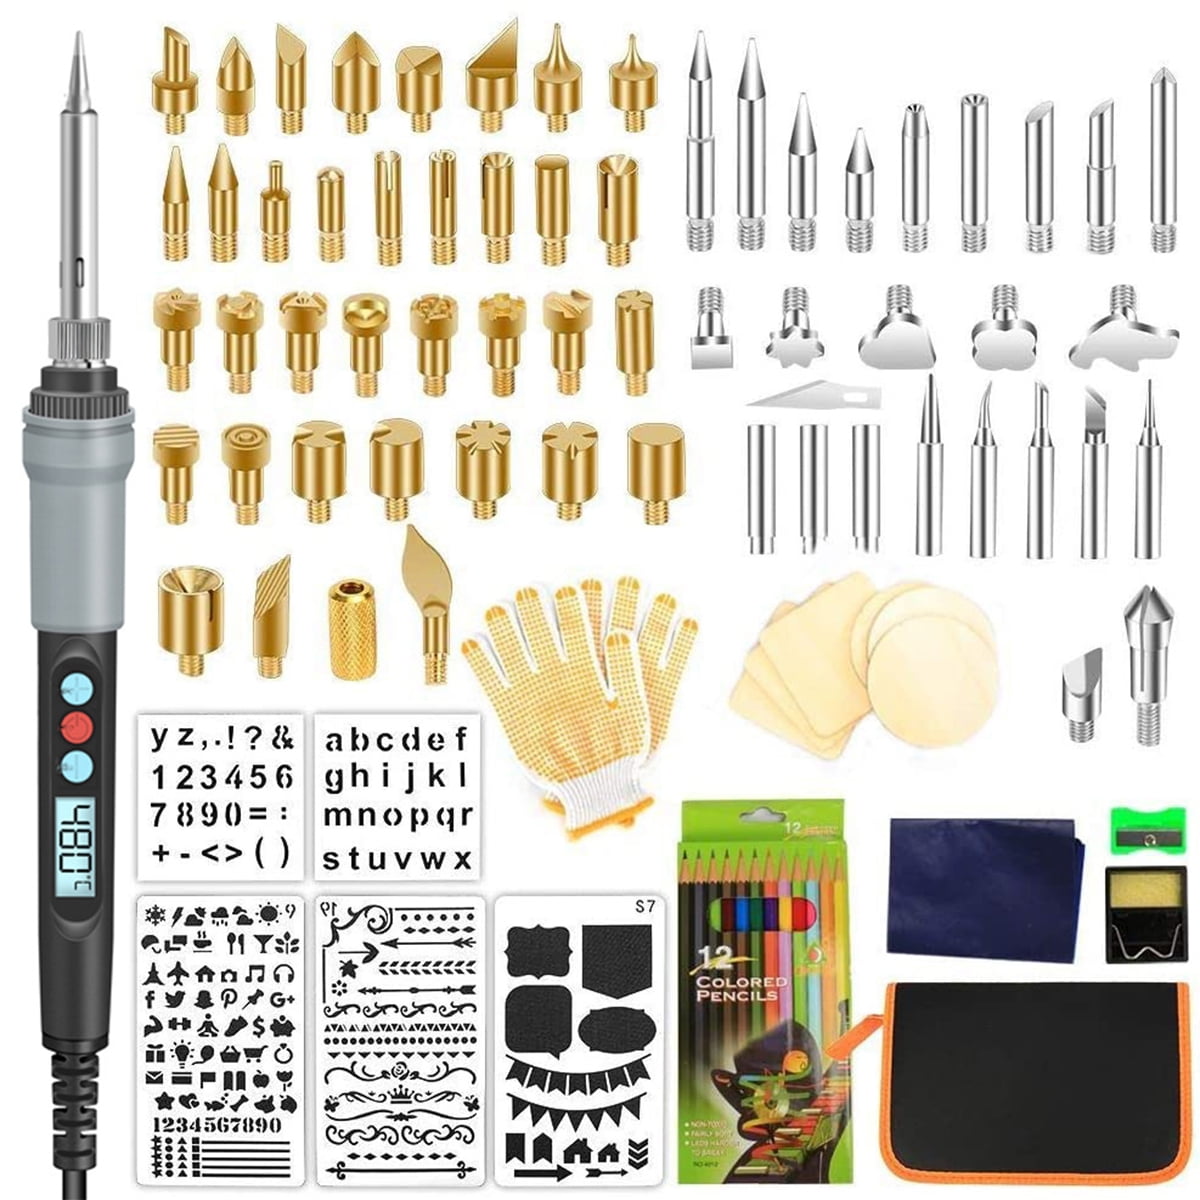 Wood Burning kit,60W 112Pcs Professional WoodBurning Pen Tool, DIY Creative  Tools with Adjust Temp Switch 200450,Wood Burner for  Embossing,Carving,Pyrography,Soldering,Suitable for Beginners,Adults  60W/112PCS